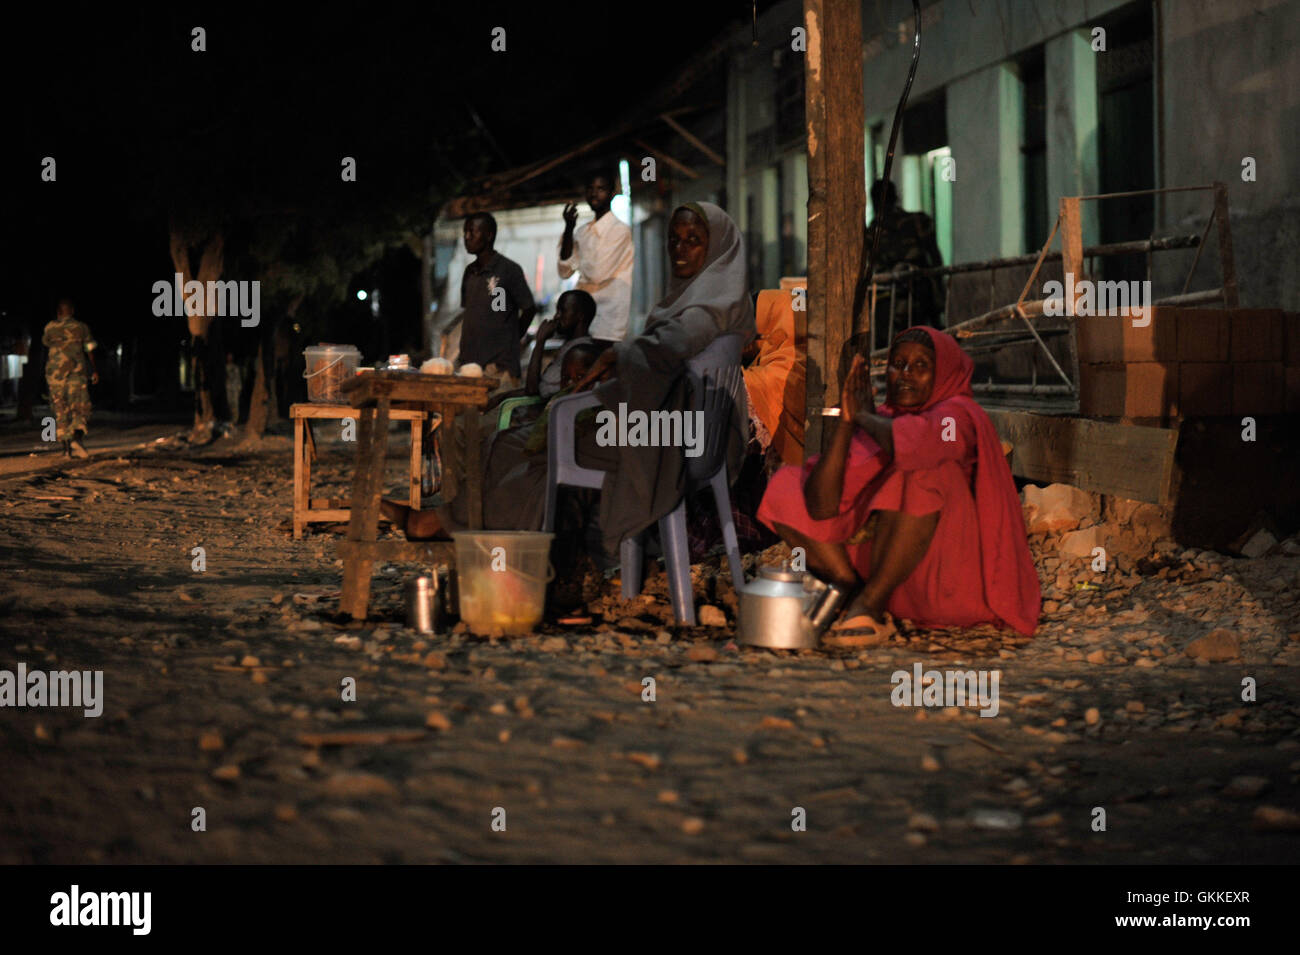 Somali women sell tea on the side of the road in Baidoa, while Ethiopian soldiers as part of the African Union Mission in Somalia, conduct a night patrol through the city on June 22. AMISOM Photo / Tobin Jones Stock Photo